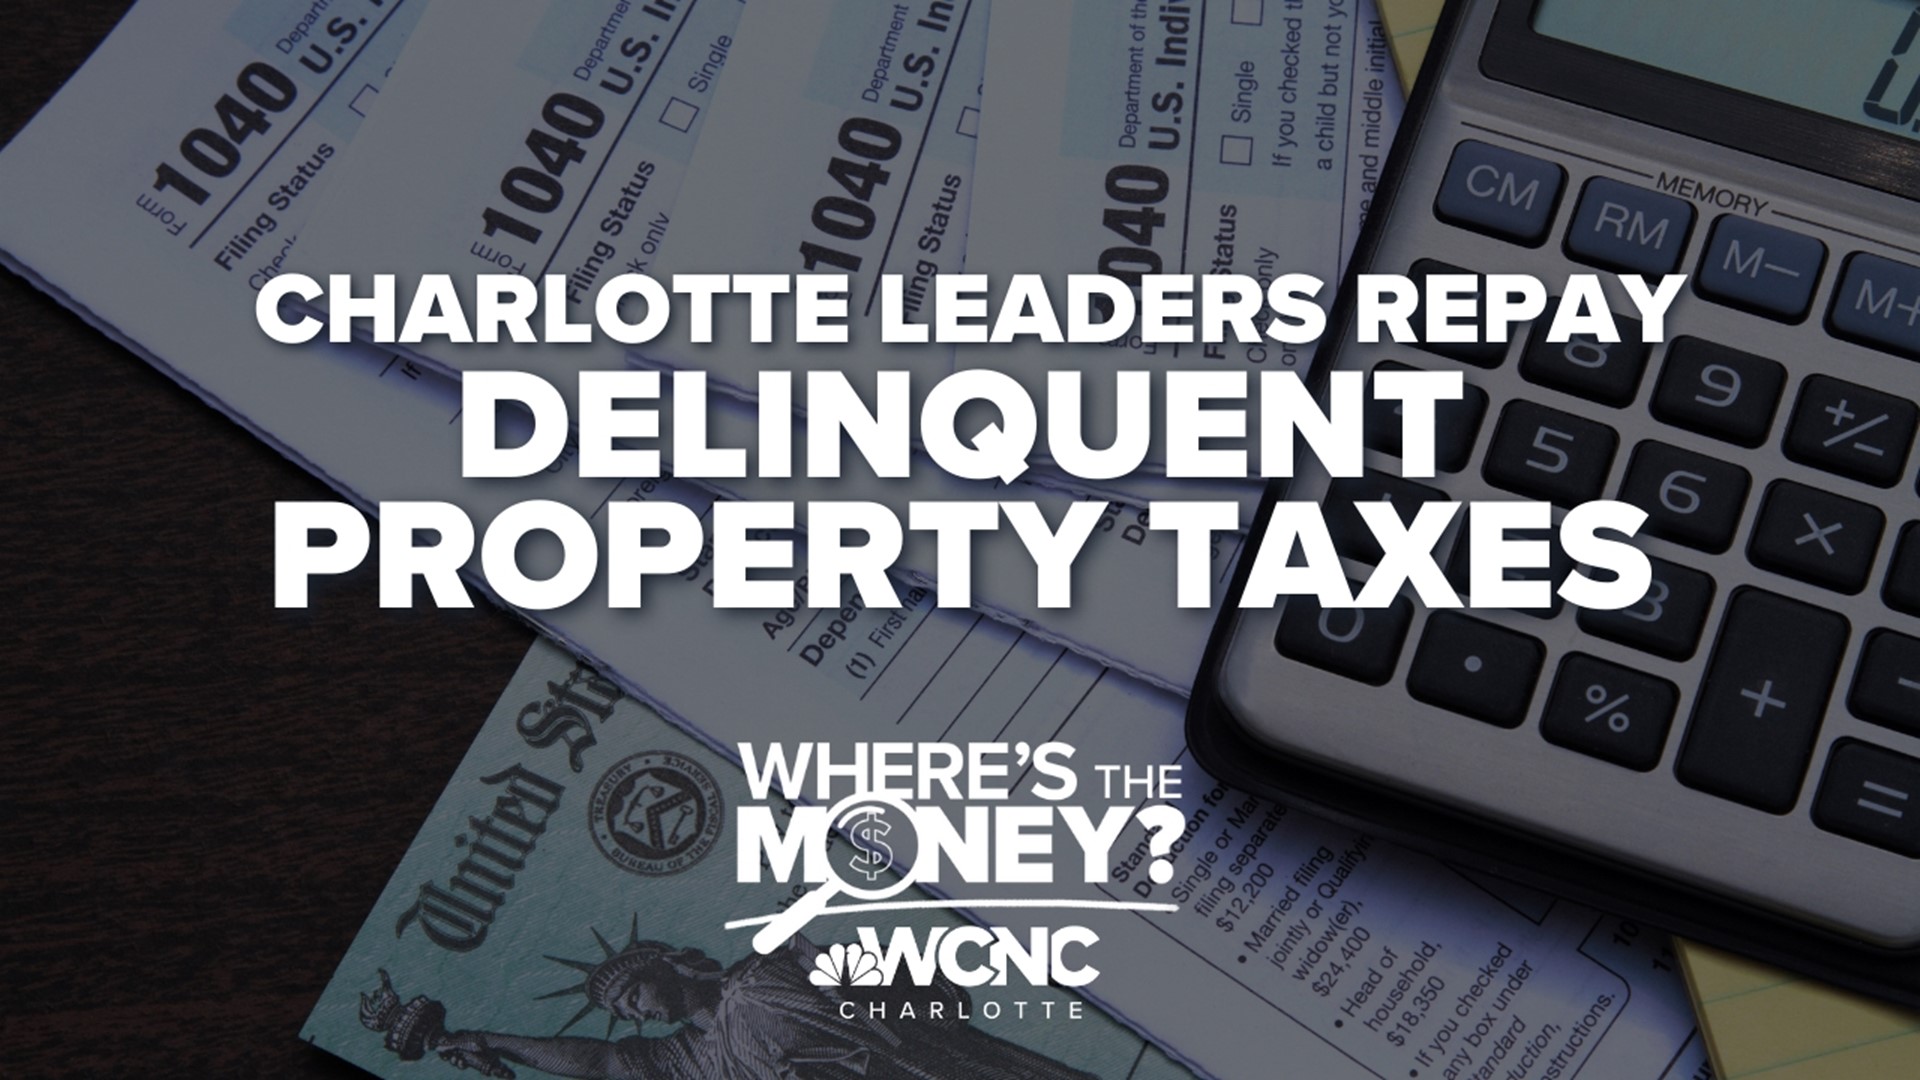 Nate Morabito shares how a Where's The Money investigation made the payments happen.